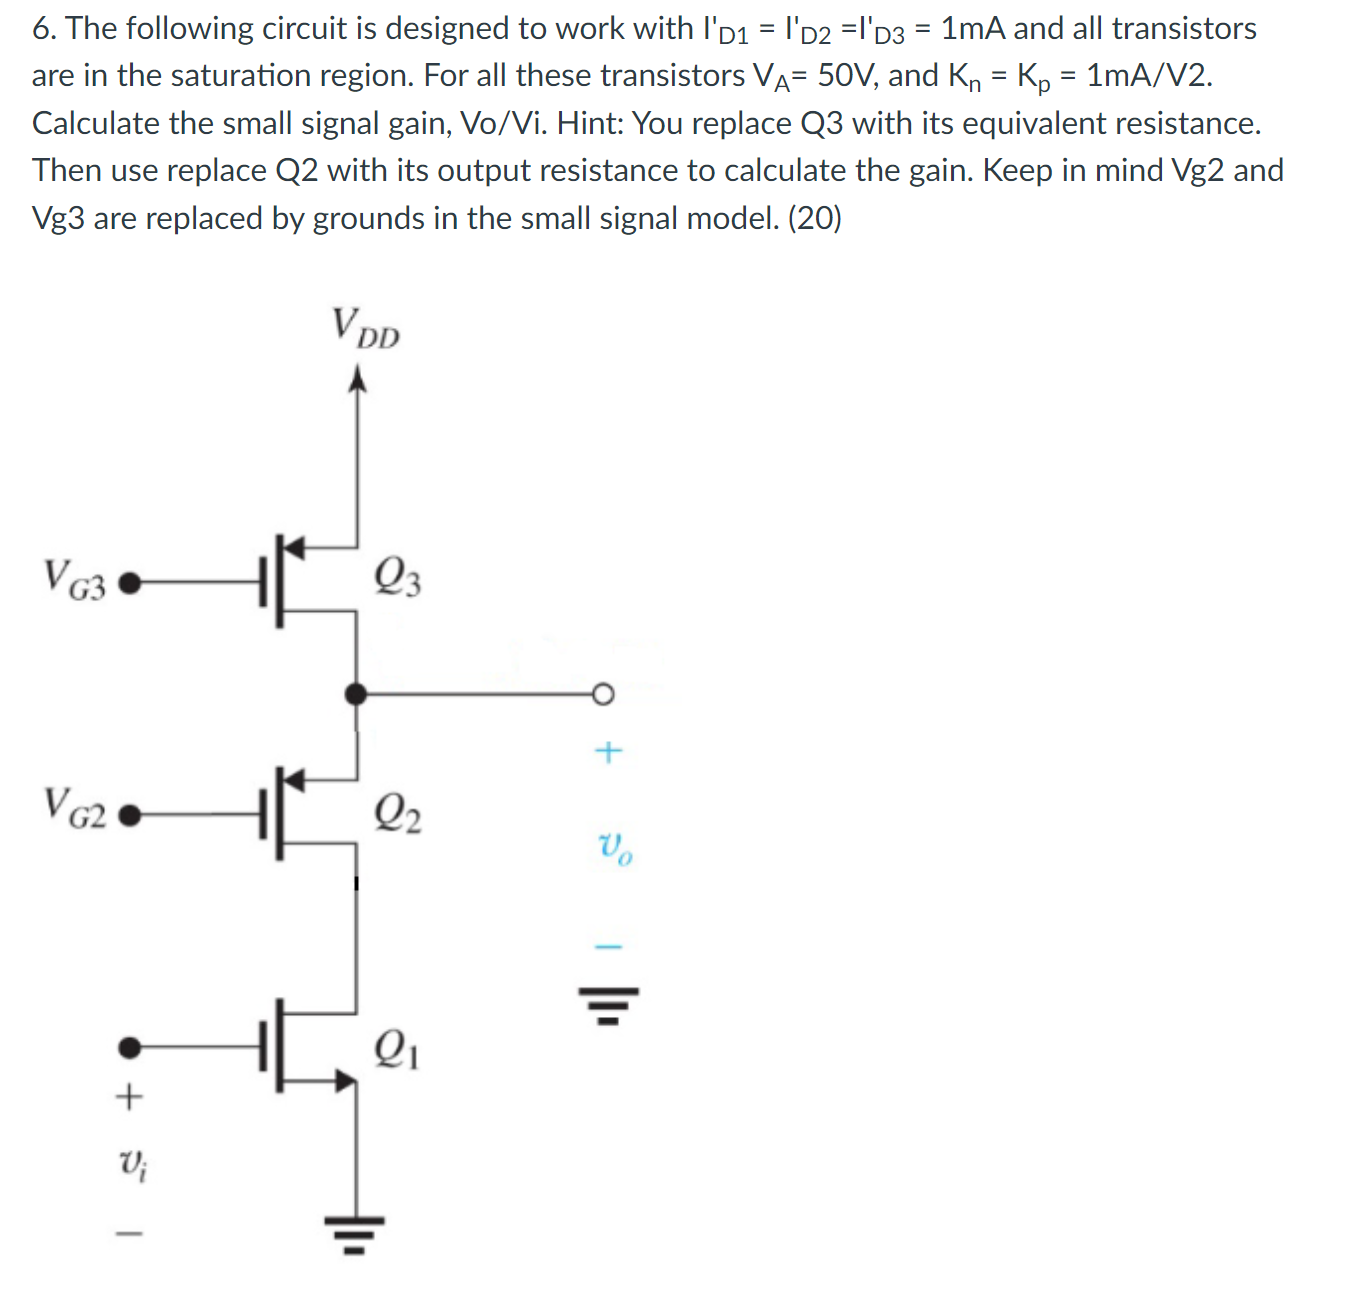 The following circuit is designed to work with ID1' = ID2' = ID3' = 1 mA and all transistors are in the saturation region. For all these transistors VA = 50 V, and Kn = Kp = 1 mA/V2. Calculate the small signal gain, Vo/Vi. Hint: You replace Q3 with its equivalent resistance. Then use replace Q2 with its output resistance to calculate the gain. Keep in mind Vg2 and Vg3 are replaced by grounds in the small signal model. (20)